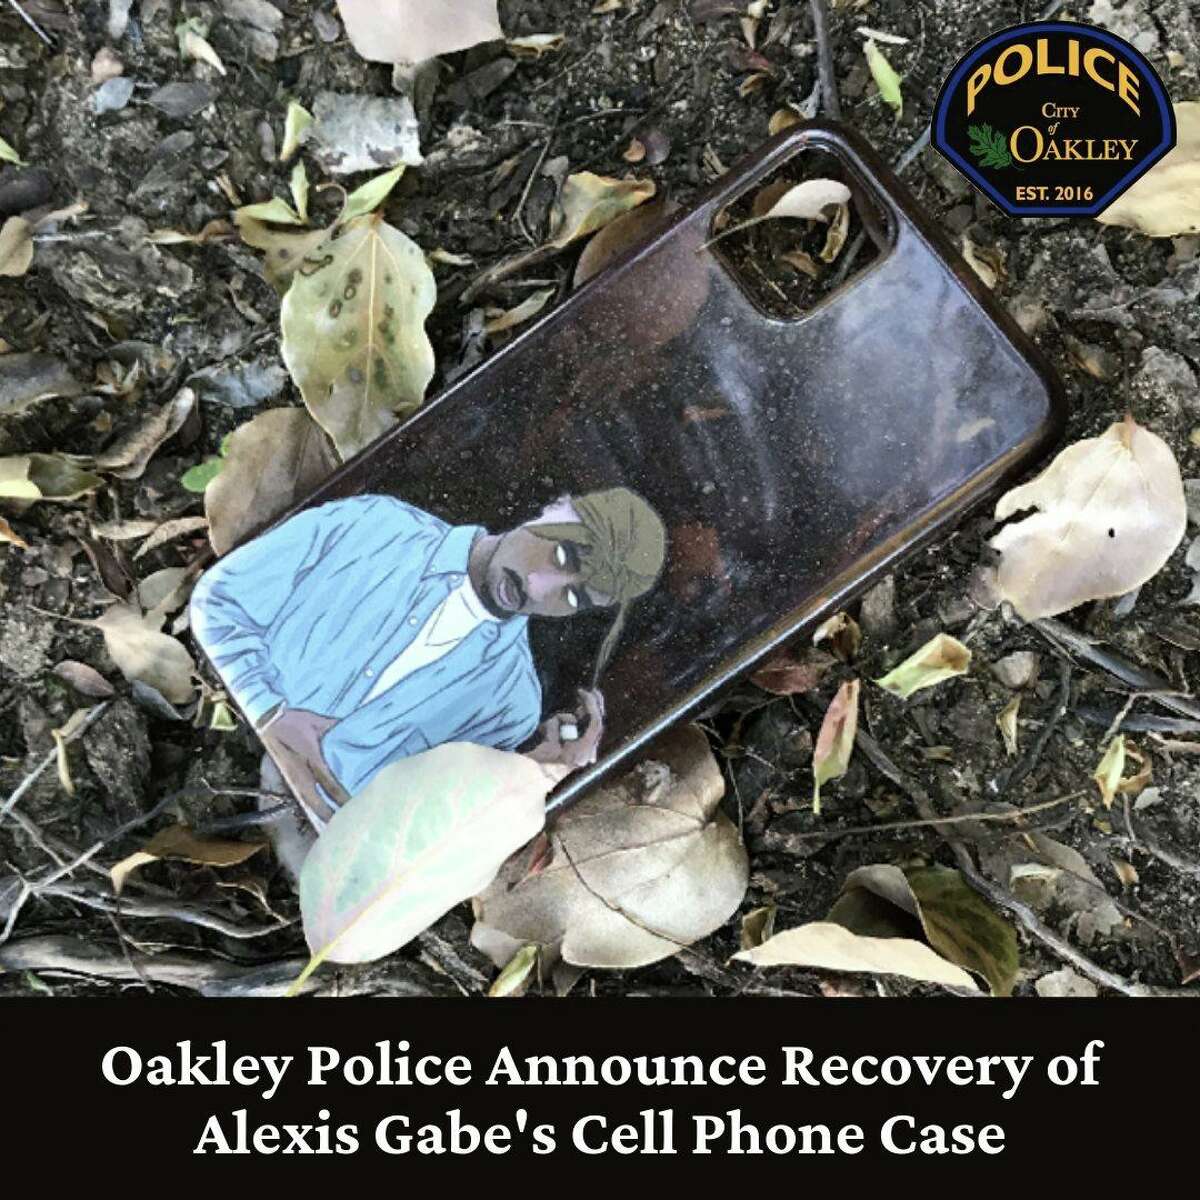 Police say they found a distinctive cell phone case believed to have belonged to Alexis Gabe, a 24-year-old Oakley woman who went missing in January. The city of Oakley announced the discovery on its Facebook page on Friday, May 13, 2022.